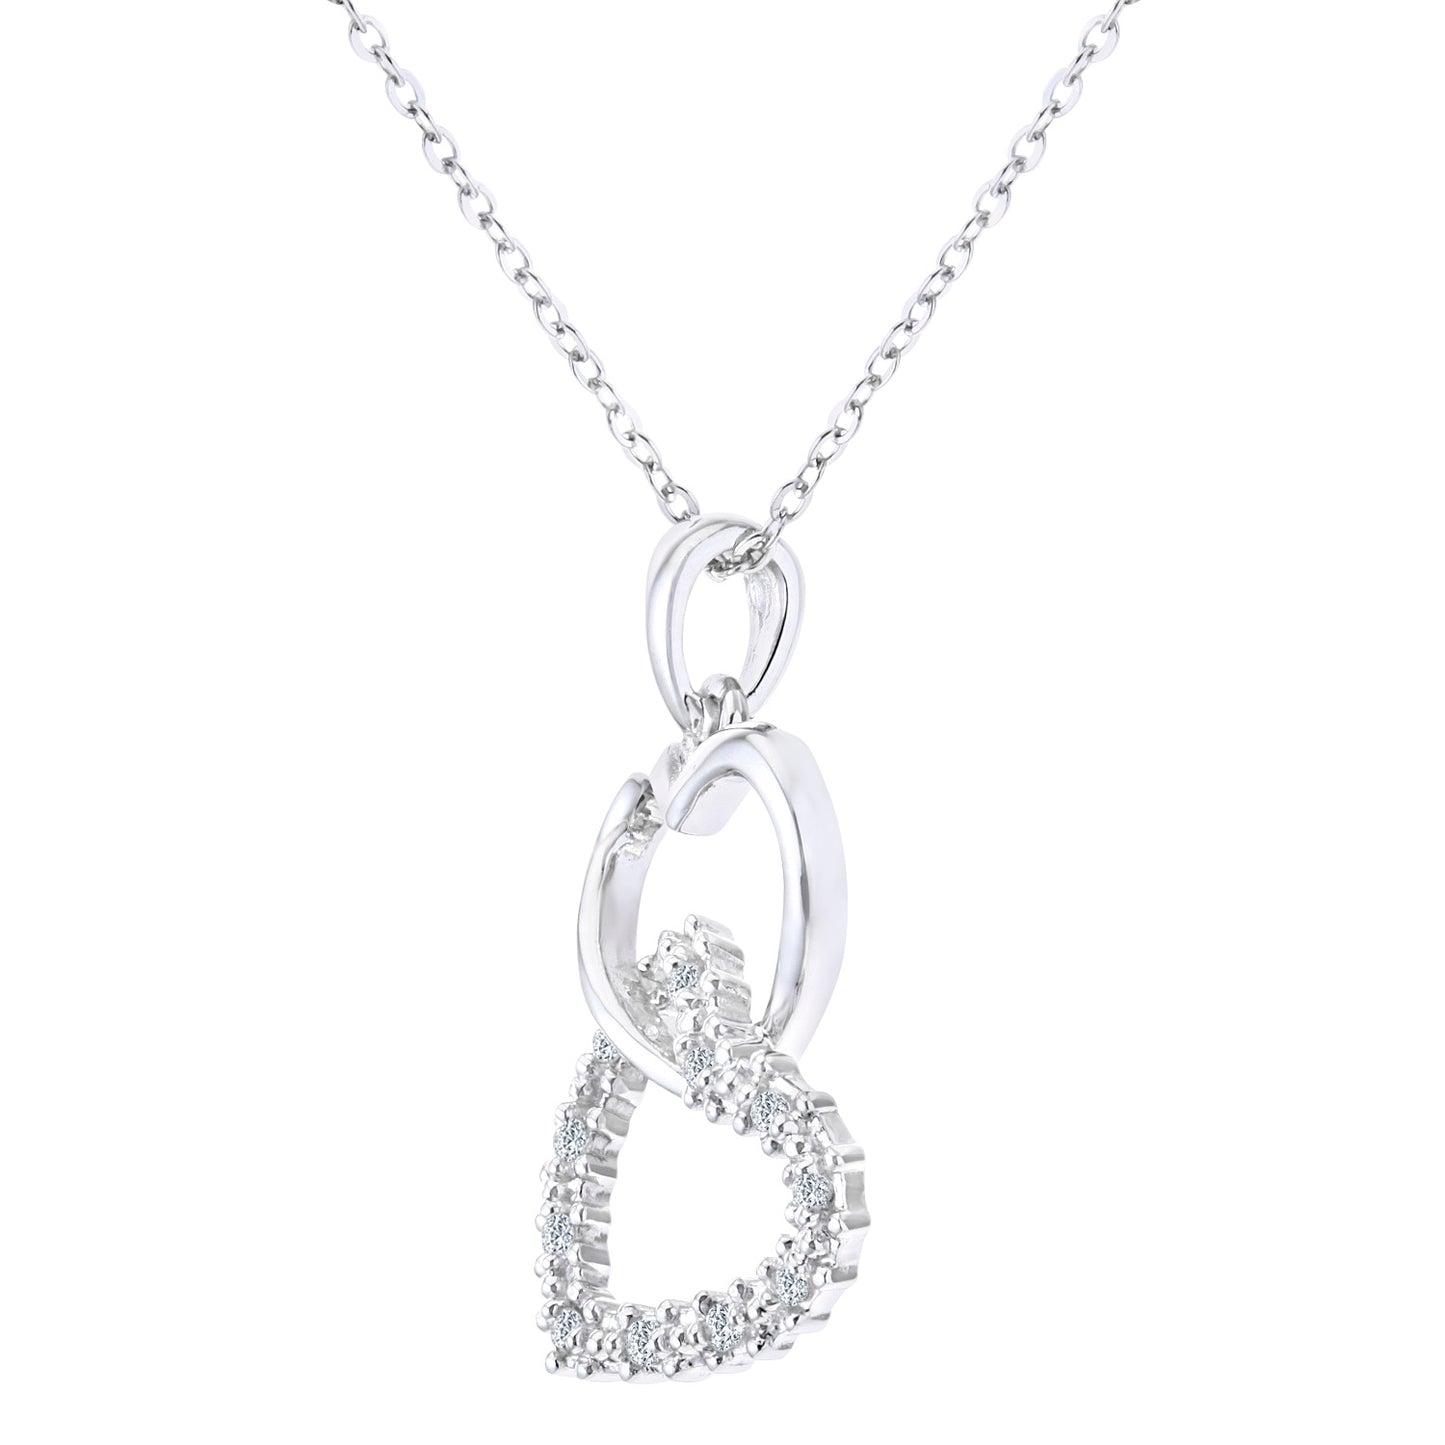 9ct White Gold  Round 5pts Diamond Heart Pendant Necklace 18 inch - PP0AXL3172W